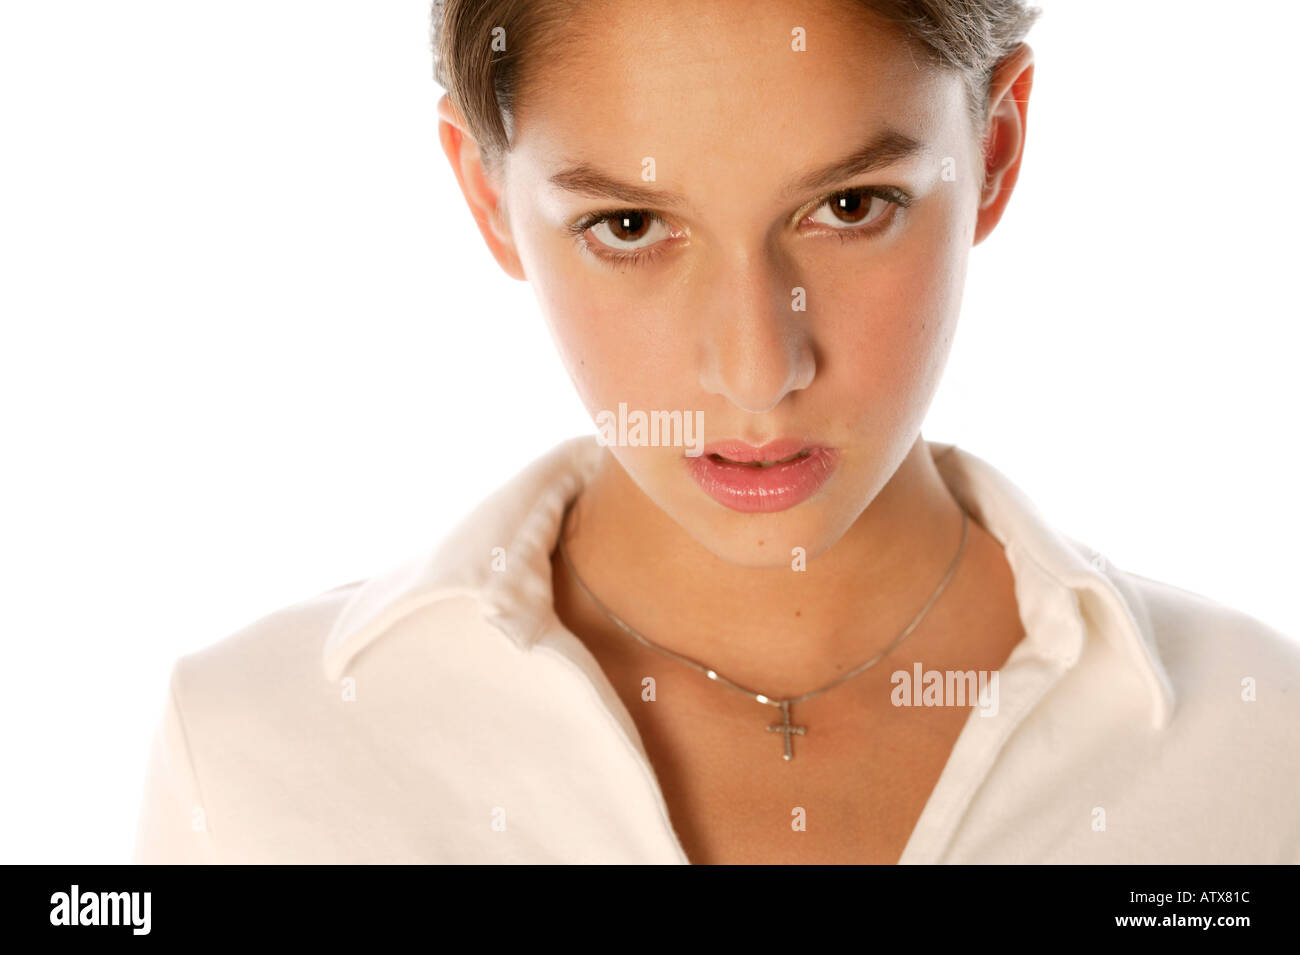 Young woman 18, 19, 20, 21, years old wearing cross necklace Stock Photo